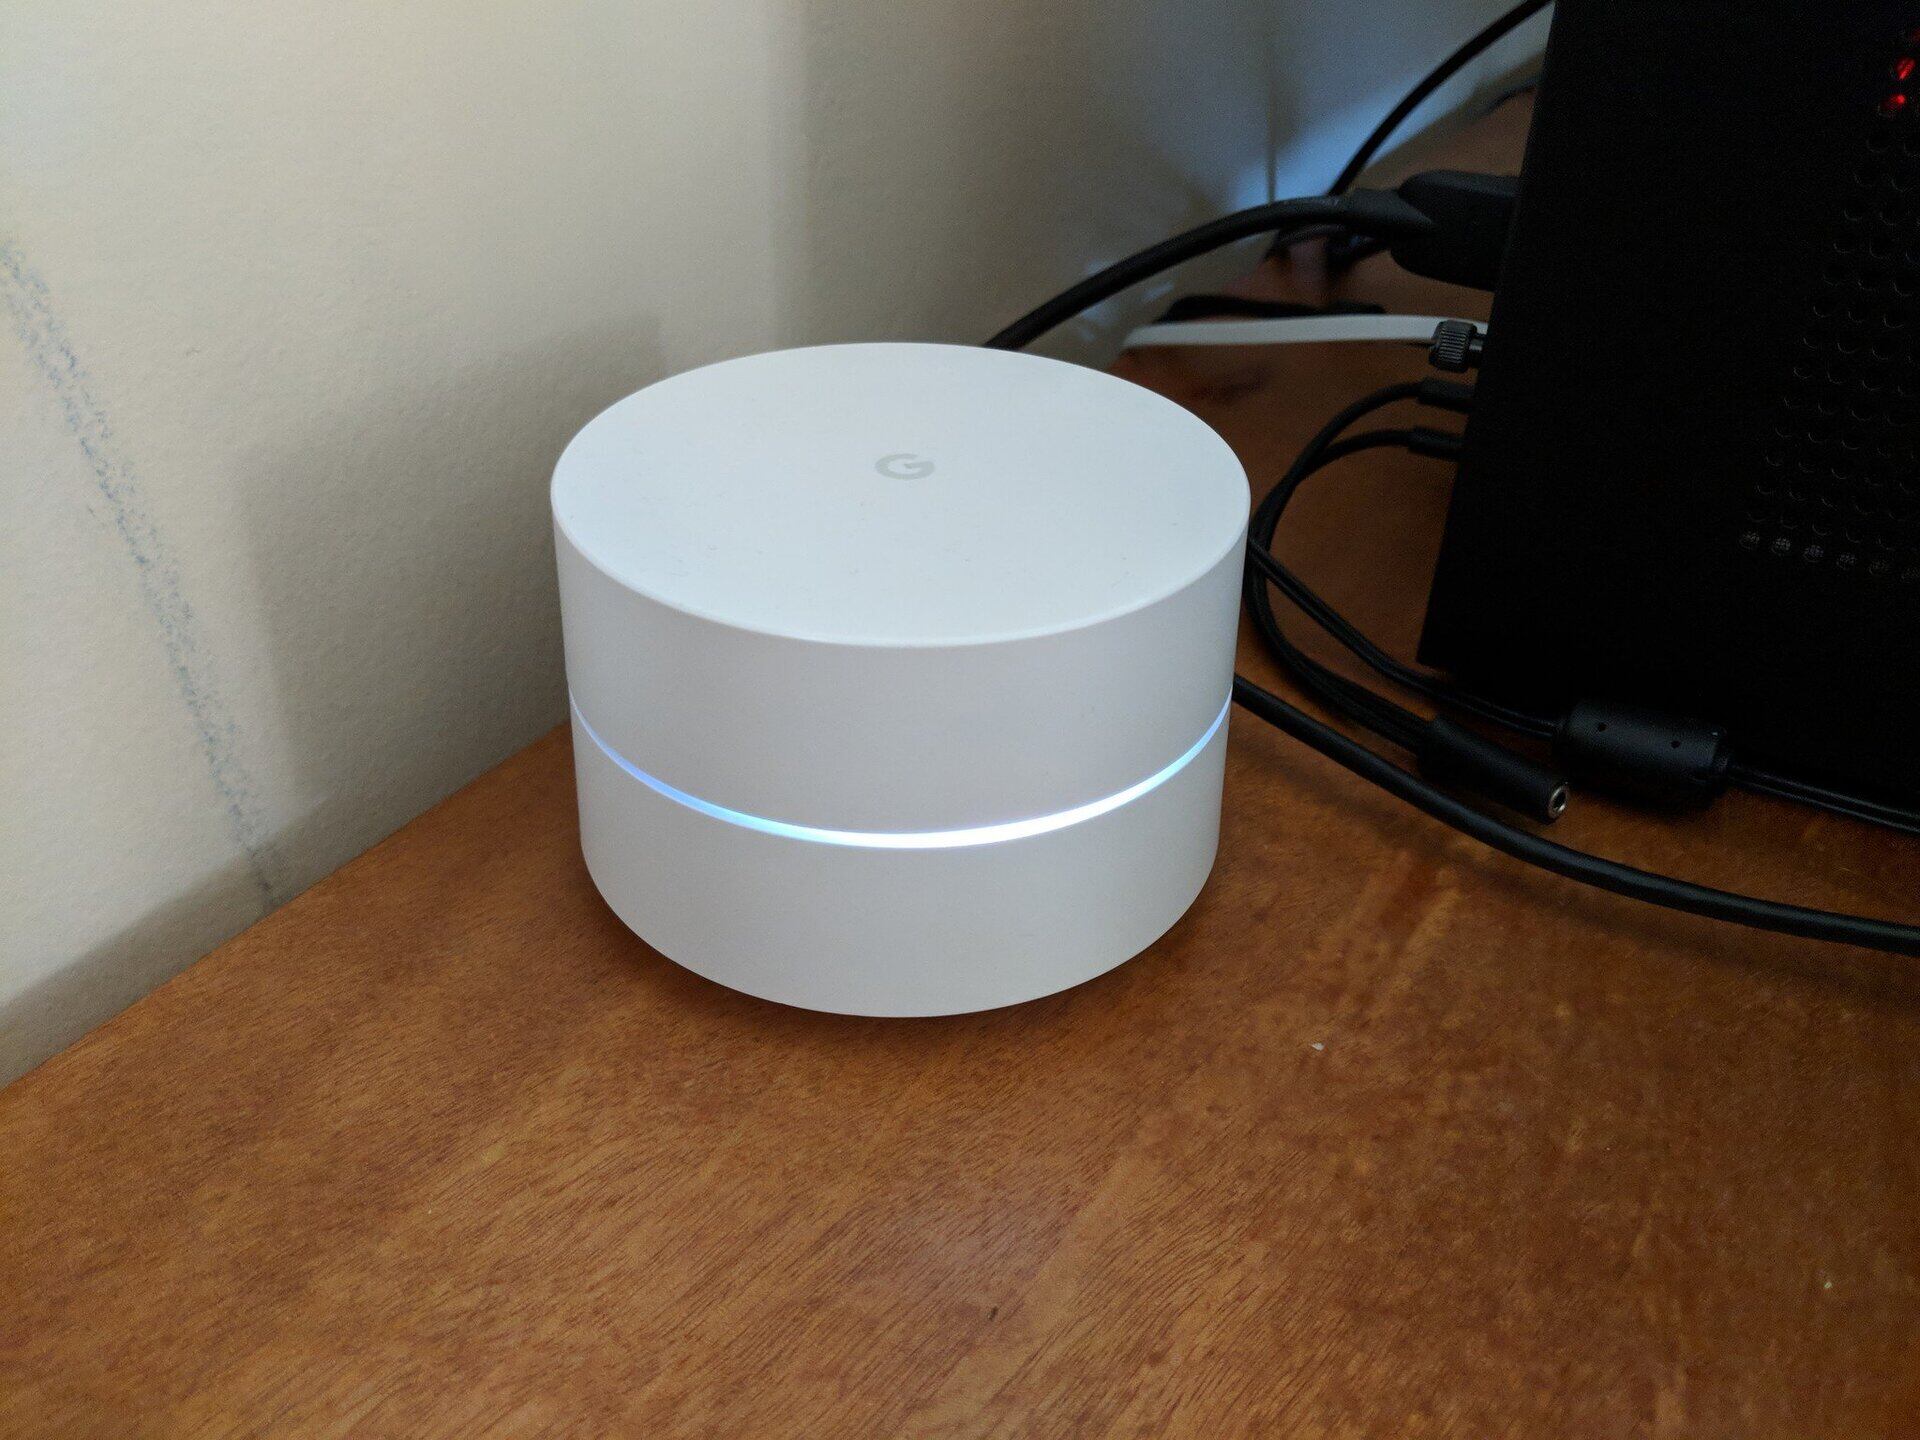 How To Set Up Google Wi-Fi Router